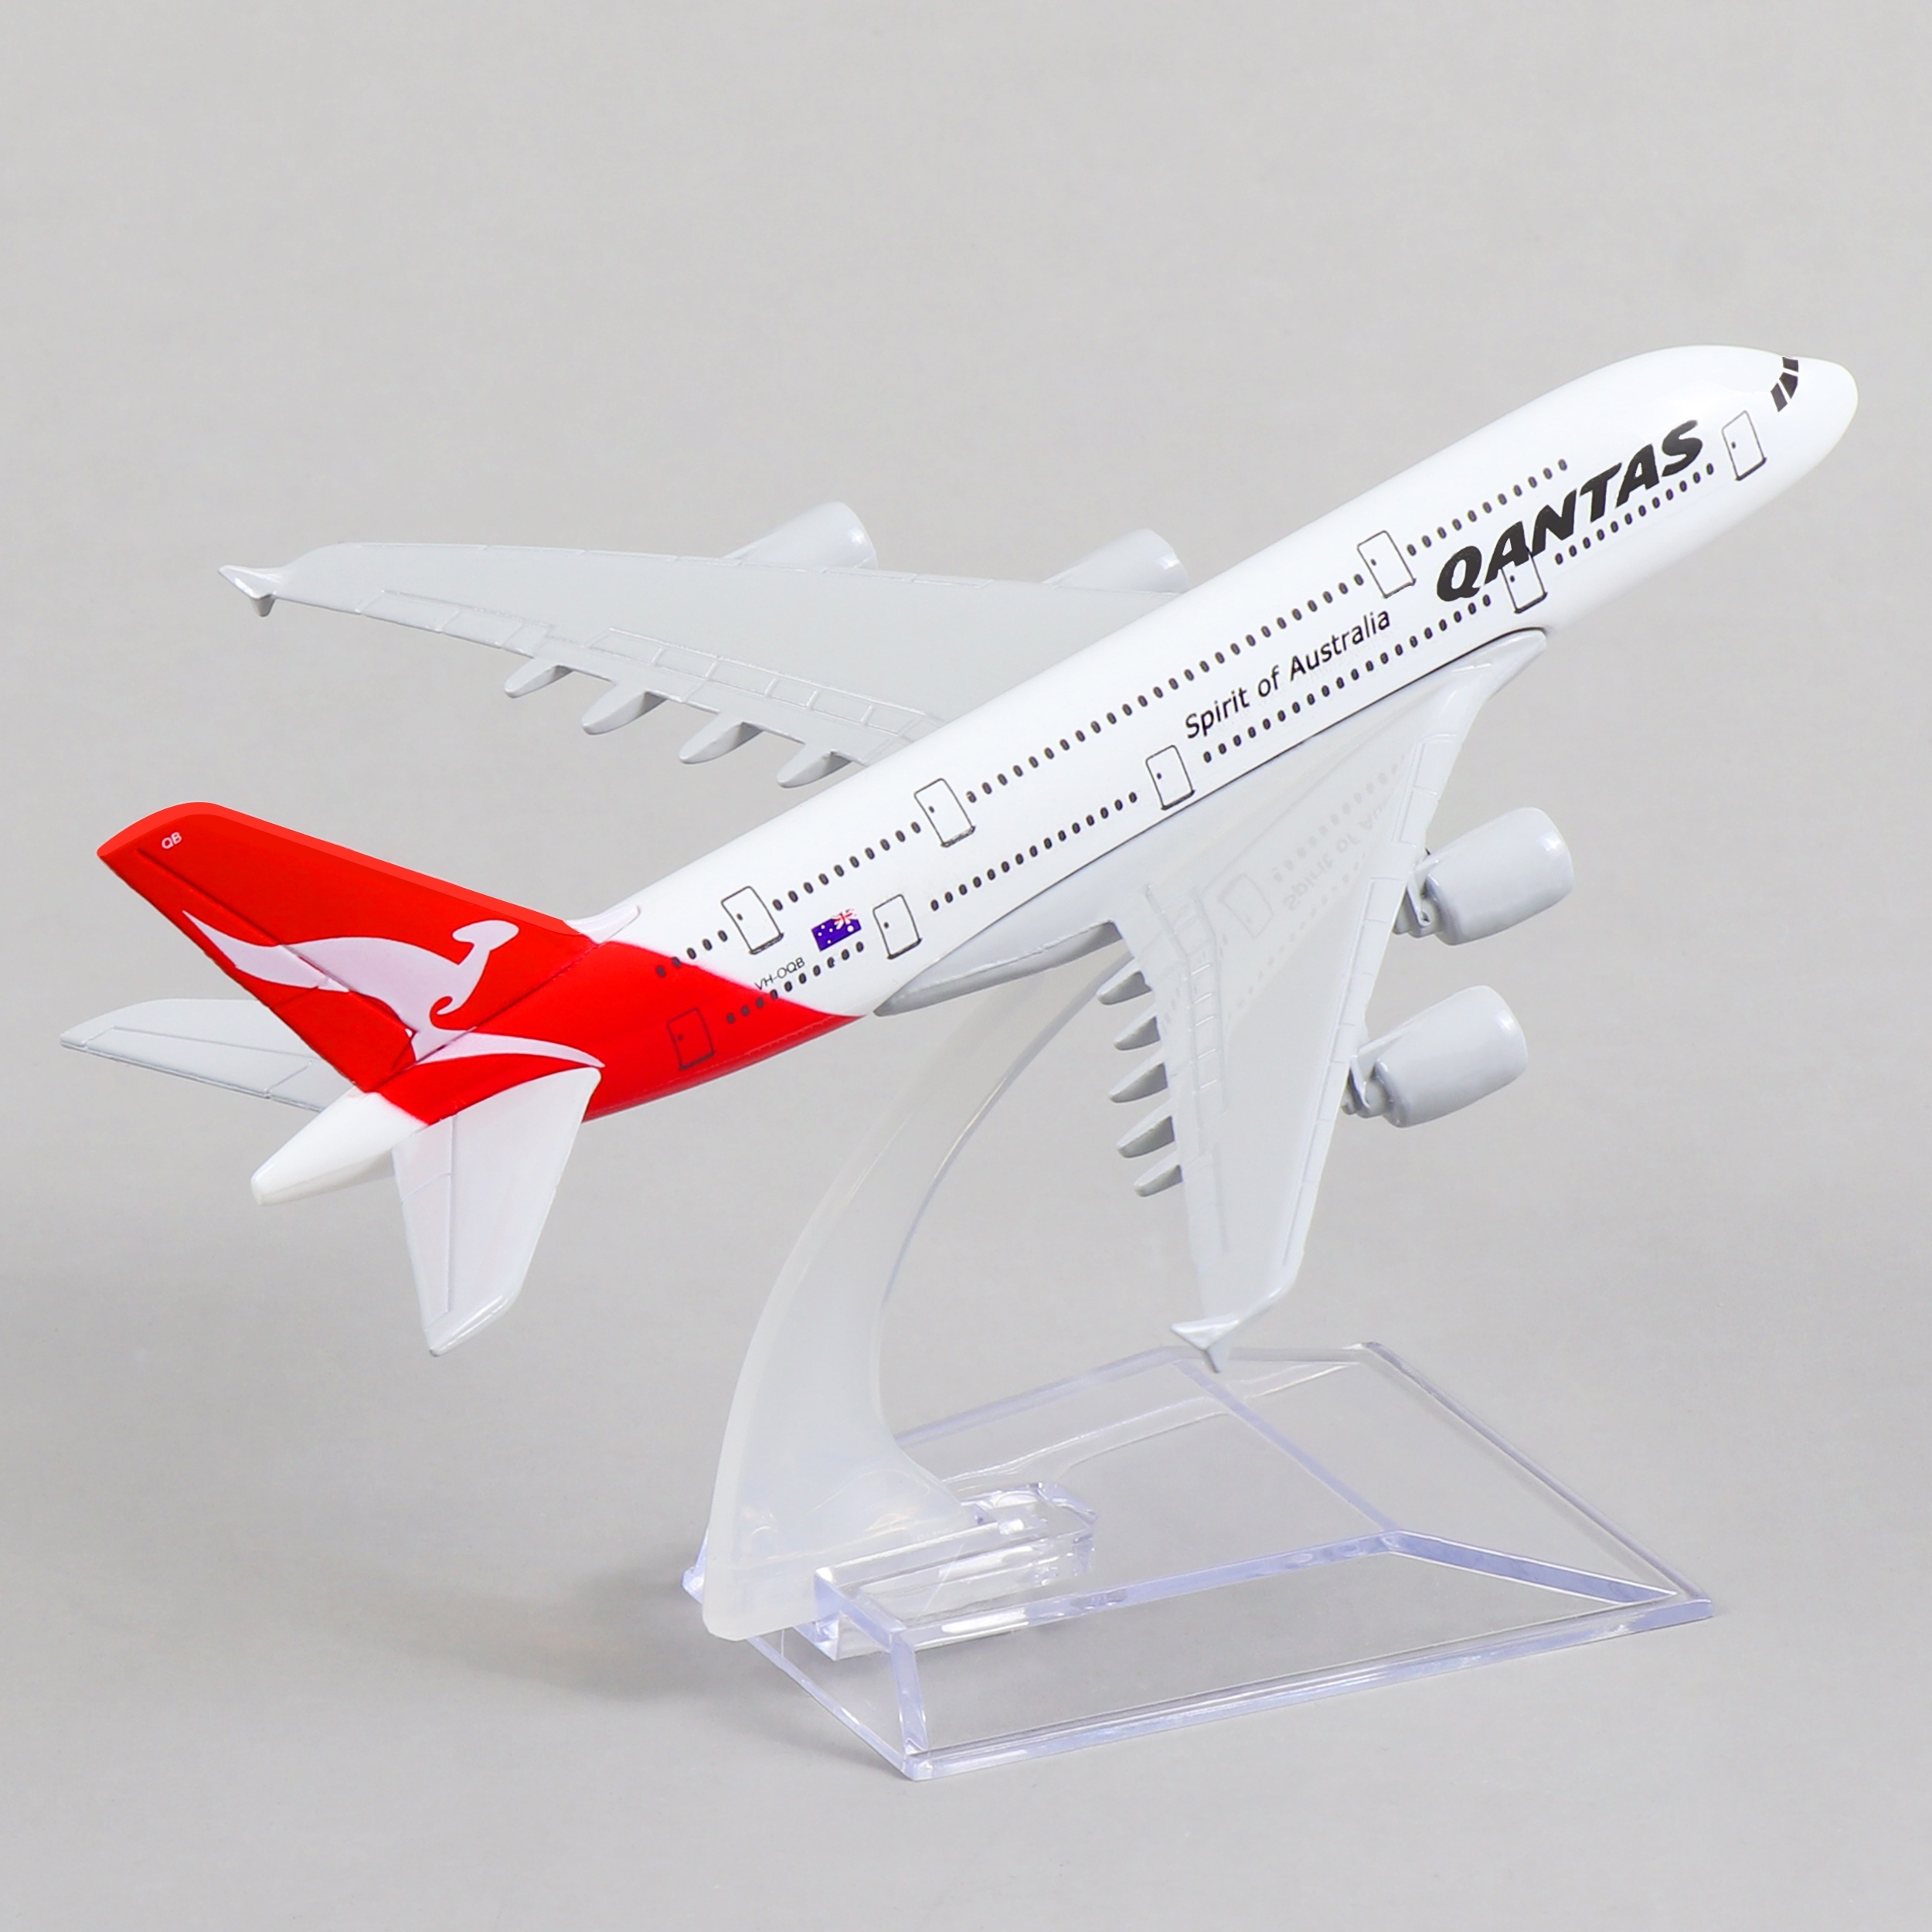 Airbus A380 Airplane Model Toys Qantas Airways 1:400 Metal DieCast Sky  Jumbo Airliner Model For Collectibles And Gifts